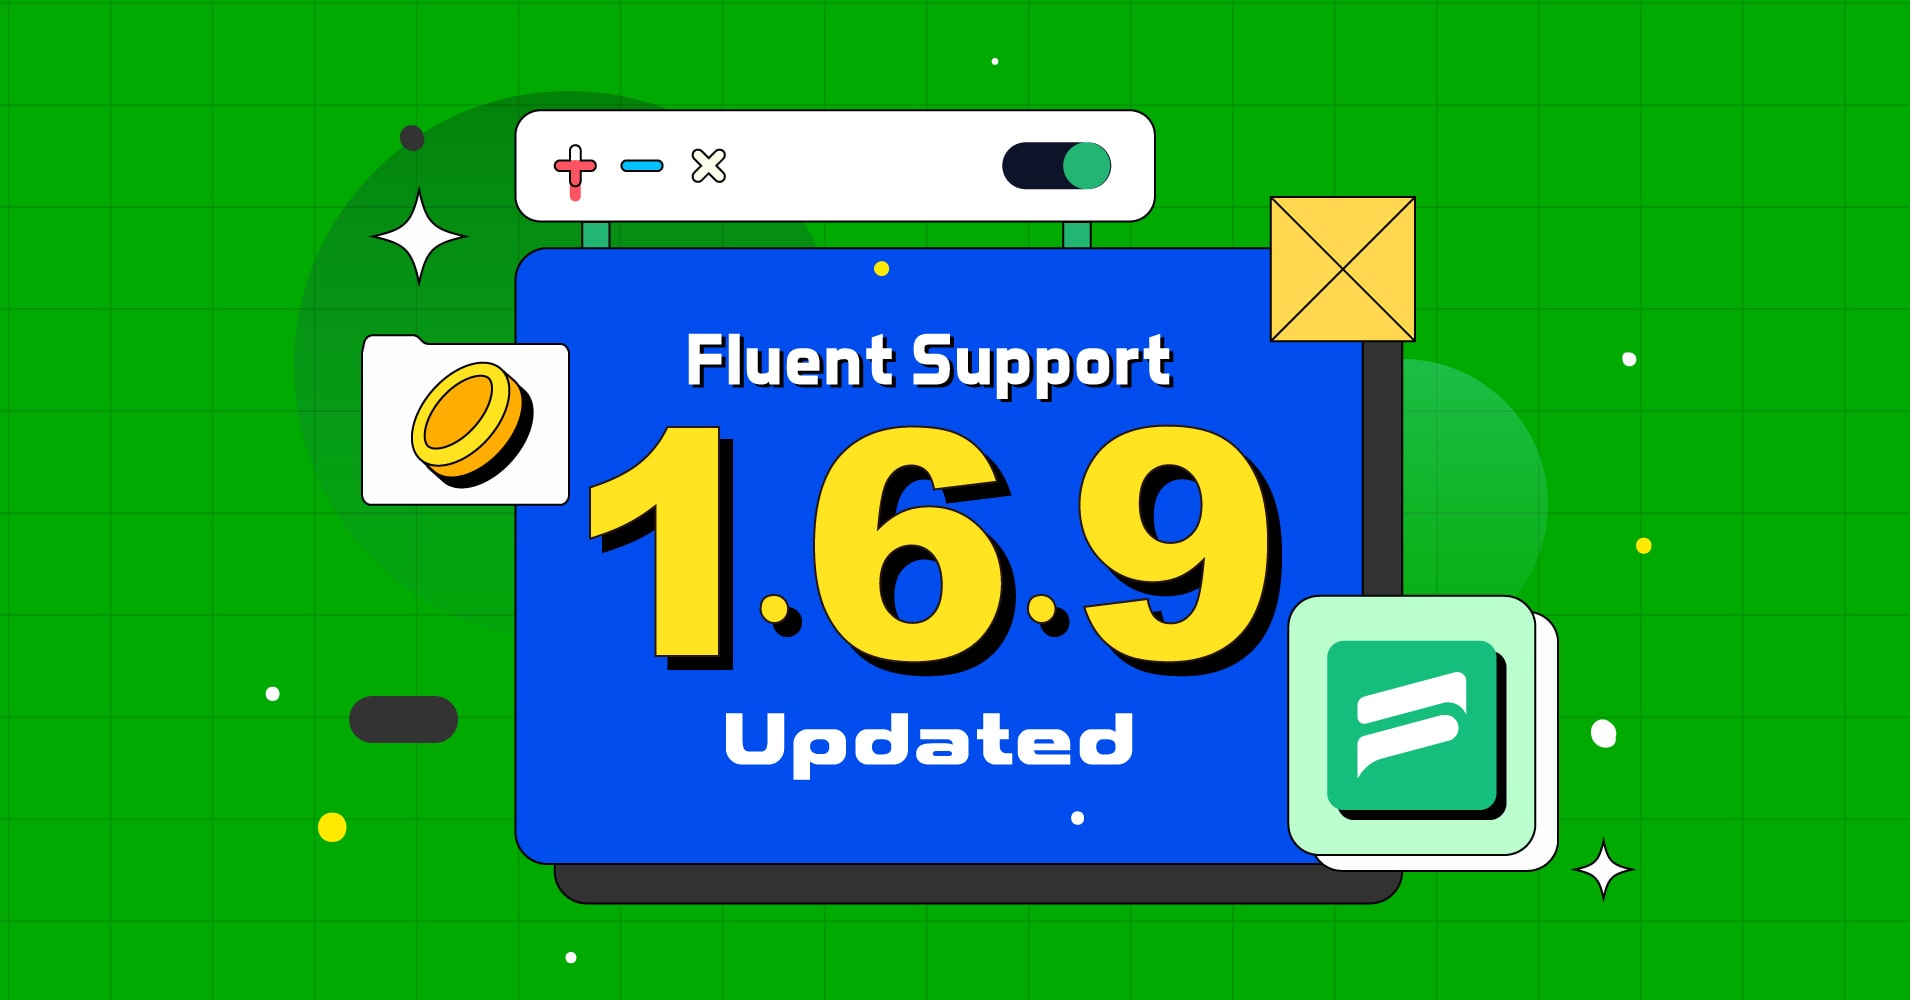 Fluent Support Release Note 1.6.9